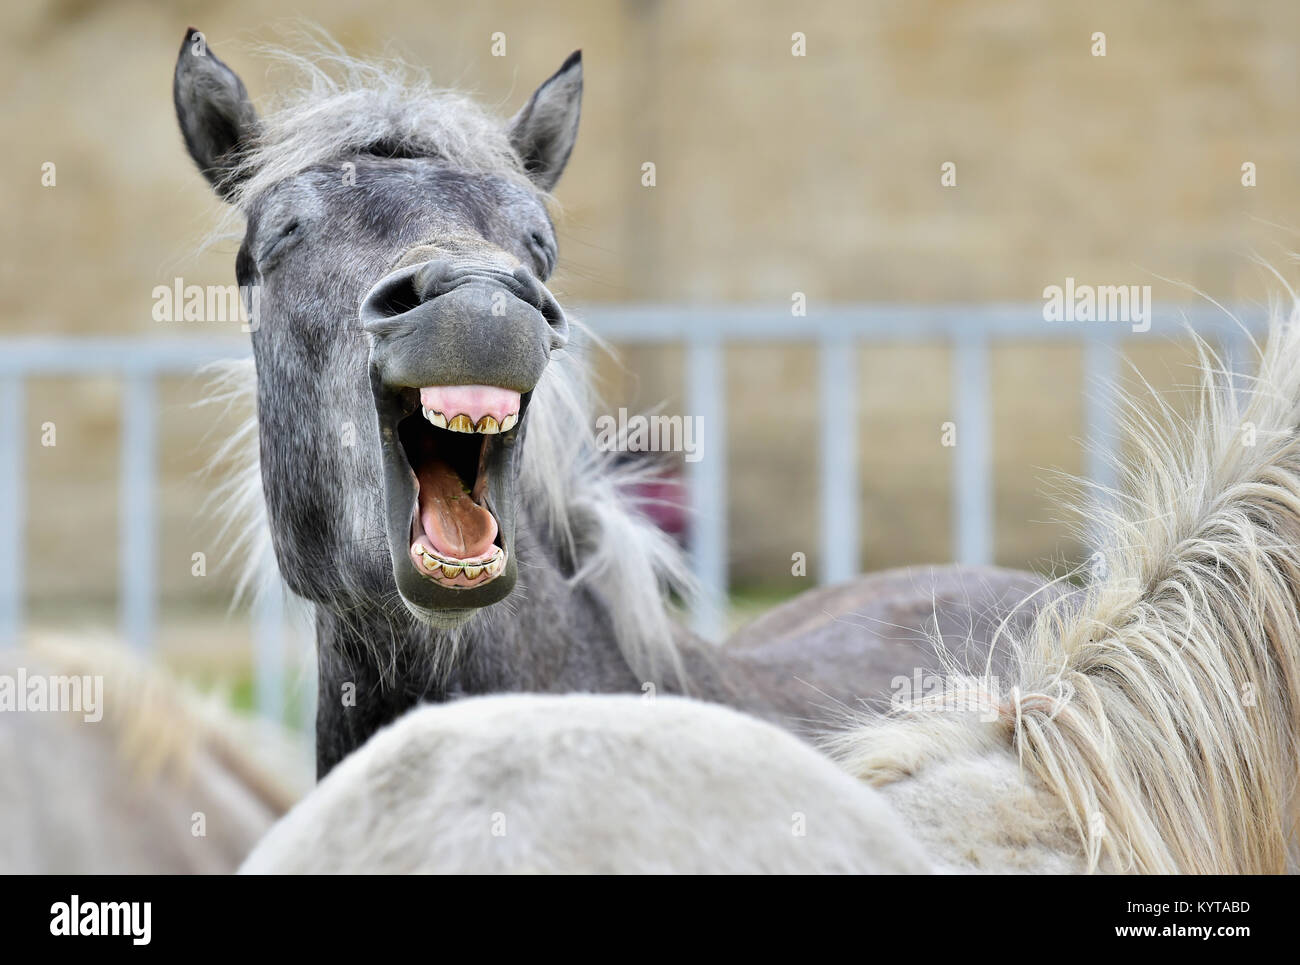 Funny portrait of a laughing horse. Camargue horse yawning, looking like he is laughing. Stock Photo